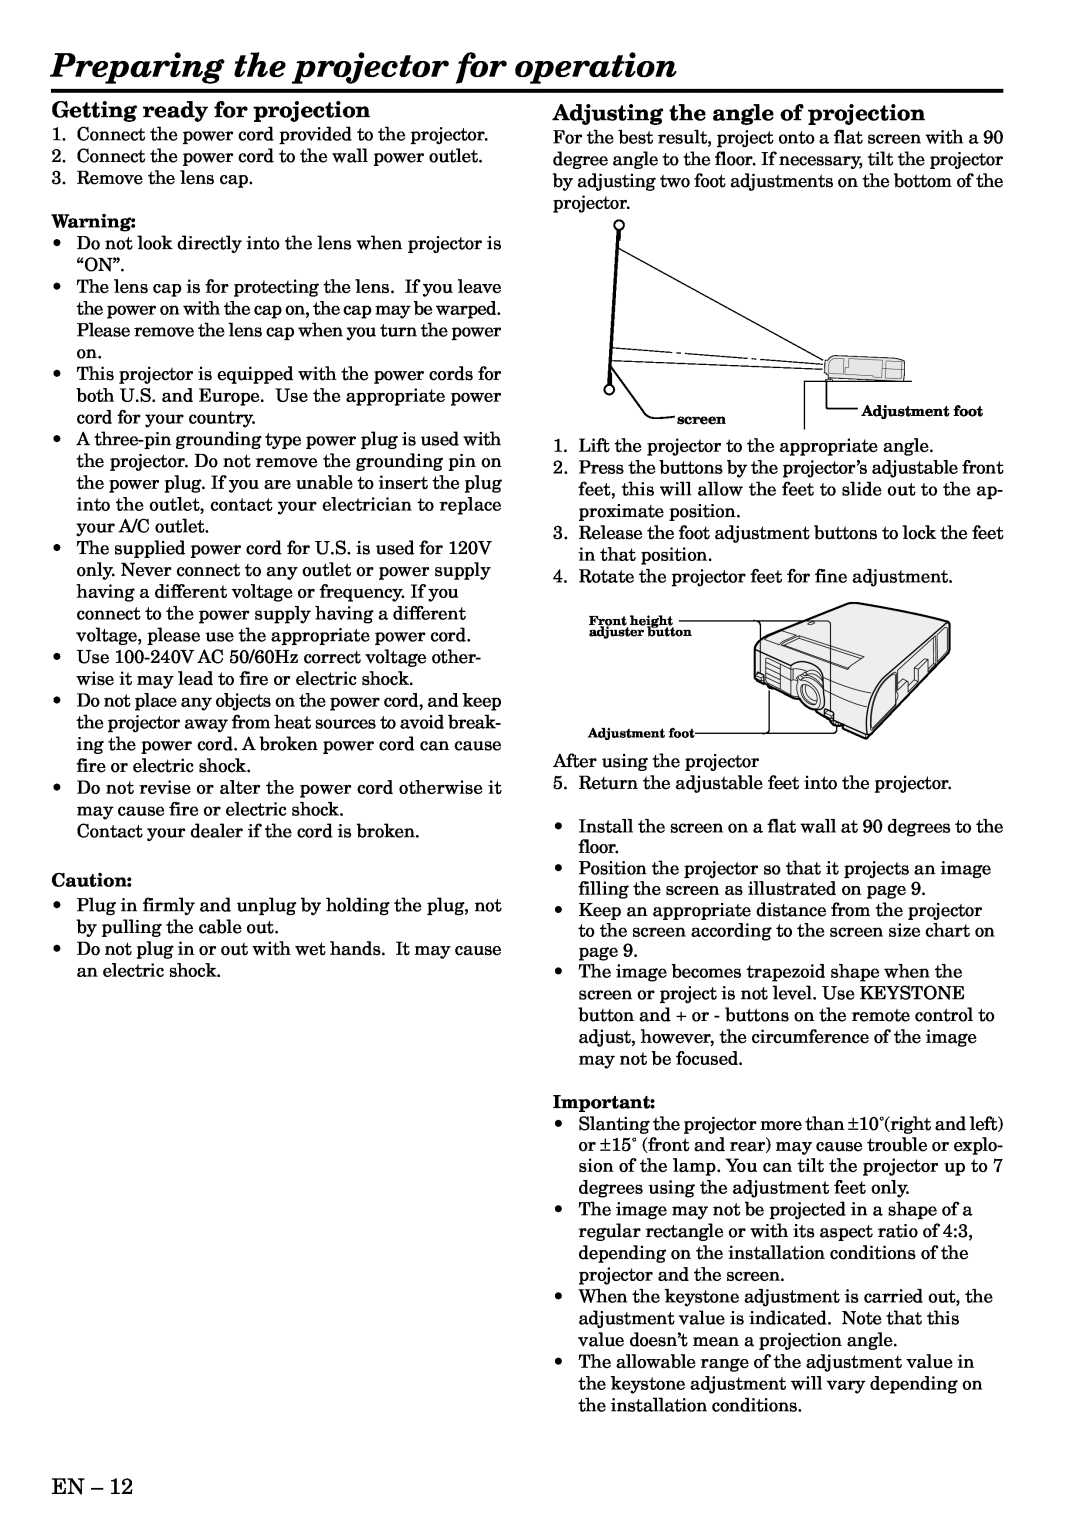 Mitsubishi Electronics XL2U user manual Preparing the projector for operation, Getting ready for projection 